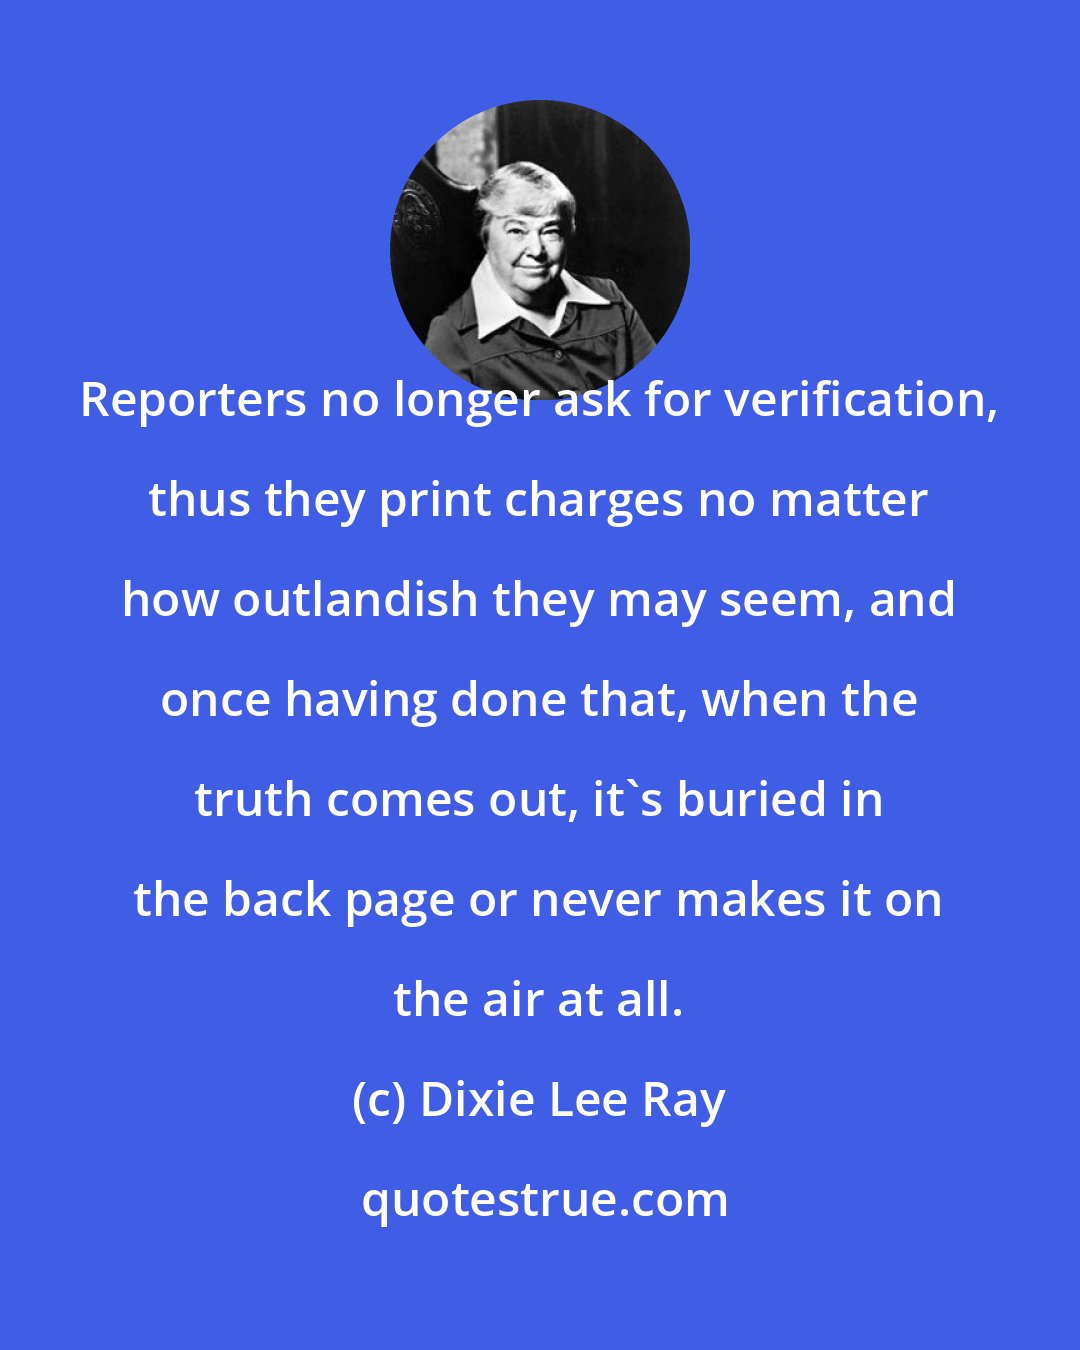 Dixie Lee Ray: Reporters no longer ask for verification, thus they print charges no matter how outlandish they may seem, and once having done that, when the truth comes out, it's buried in the back page or never makes it on the air at all.